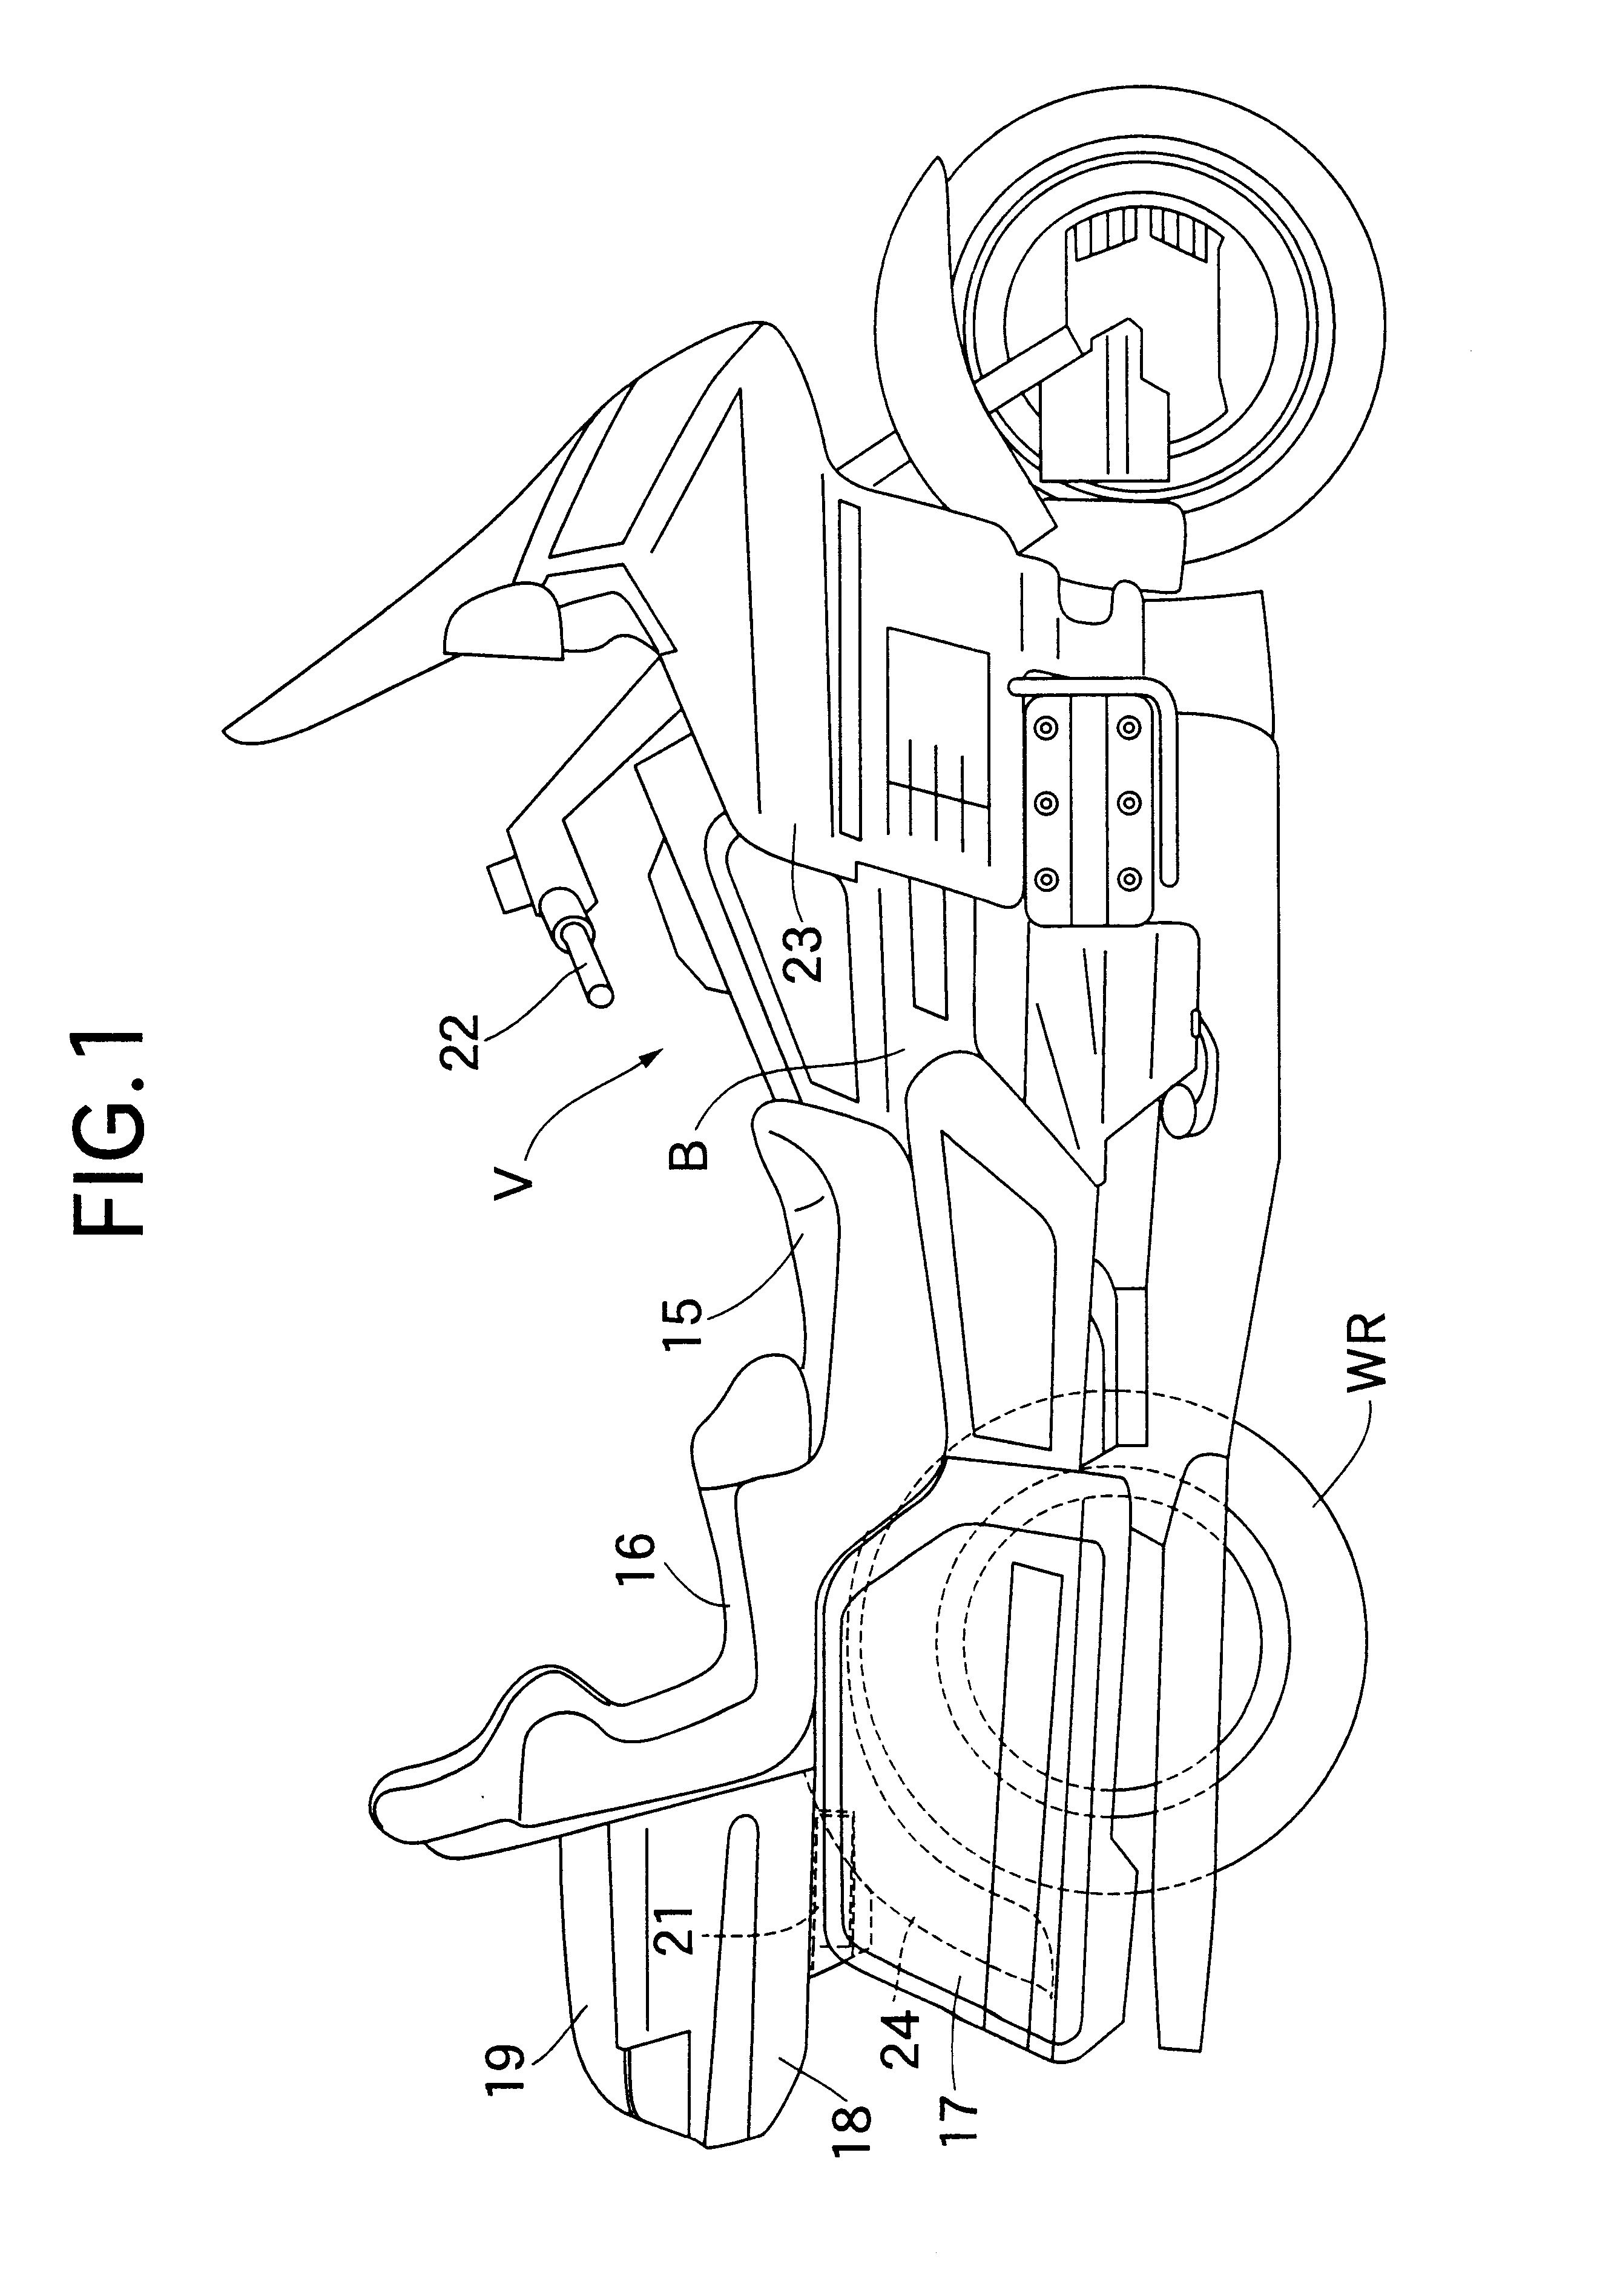 CD changer mounting structure and support device